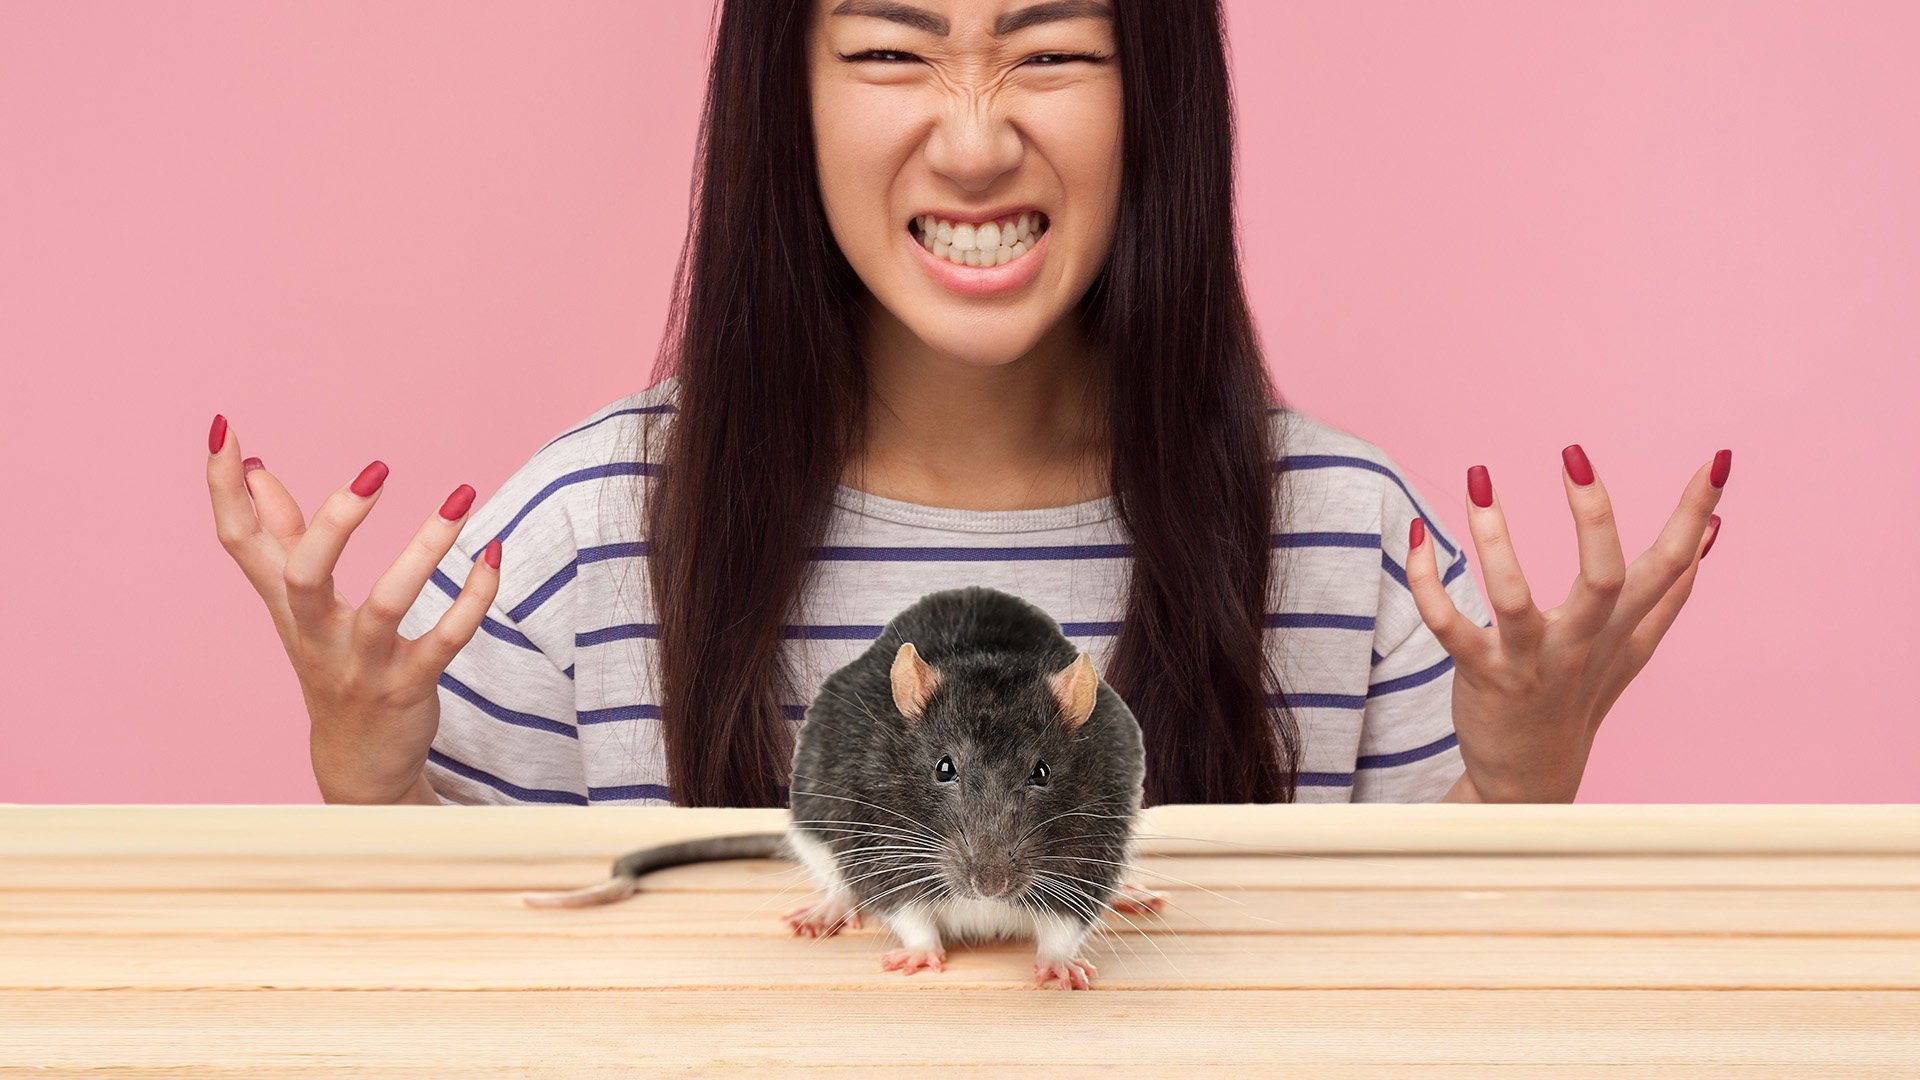 A university student in China has shocked mainland social media by taking revenge on a mouse she caught in her dormitory, which bit her finger, by sinking her teeth into the head of the pesky rodent. Photo: SCMP composite/Shutterstock